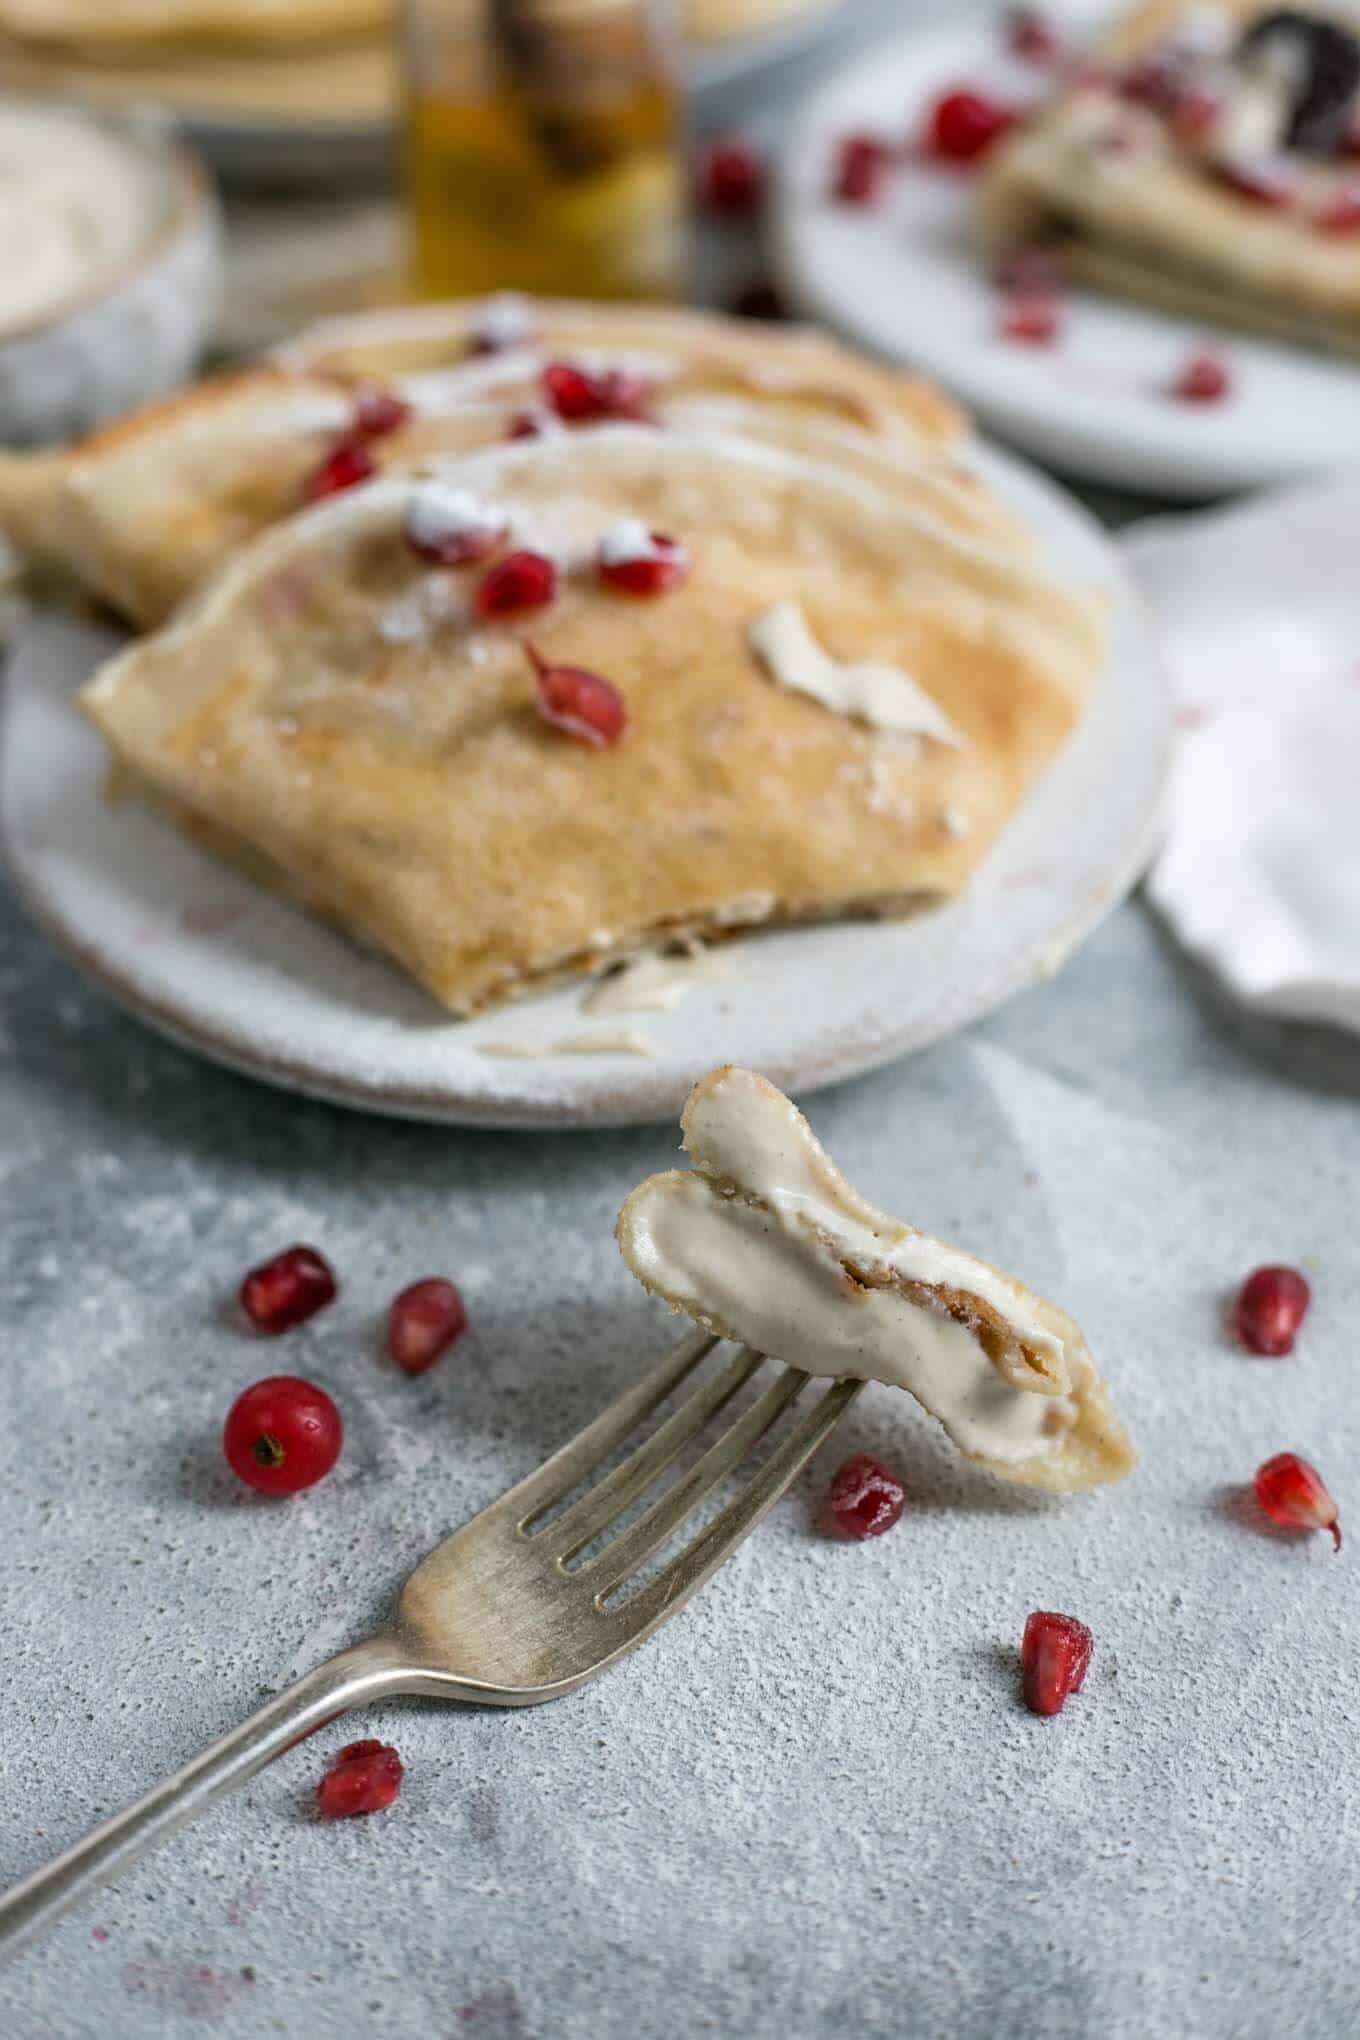 Super tasty, easy and delicious vegan french crepes! Only handful of ingredients, perfect breakfast or dessert! #vegan #breakfast #crepes | via @annabanana.co